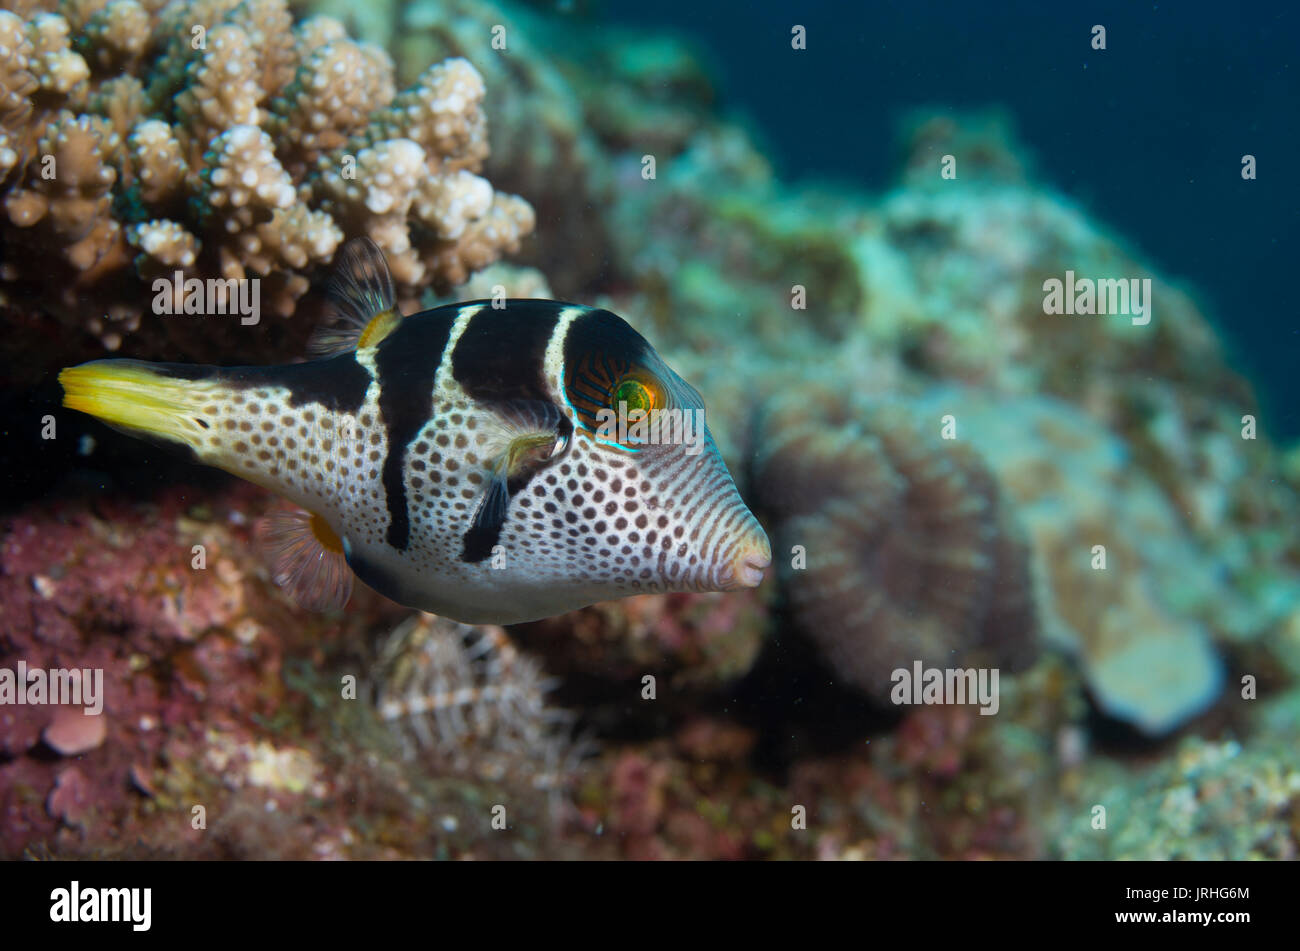 Valentin's sharpnose puffer (Canthigaster valentini), also known as the saddled puffer or black saddled toby. Cape Maeda, Okinawa, Japan. Stock Photo